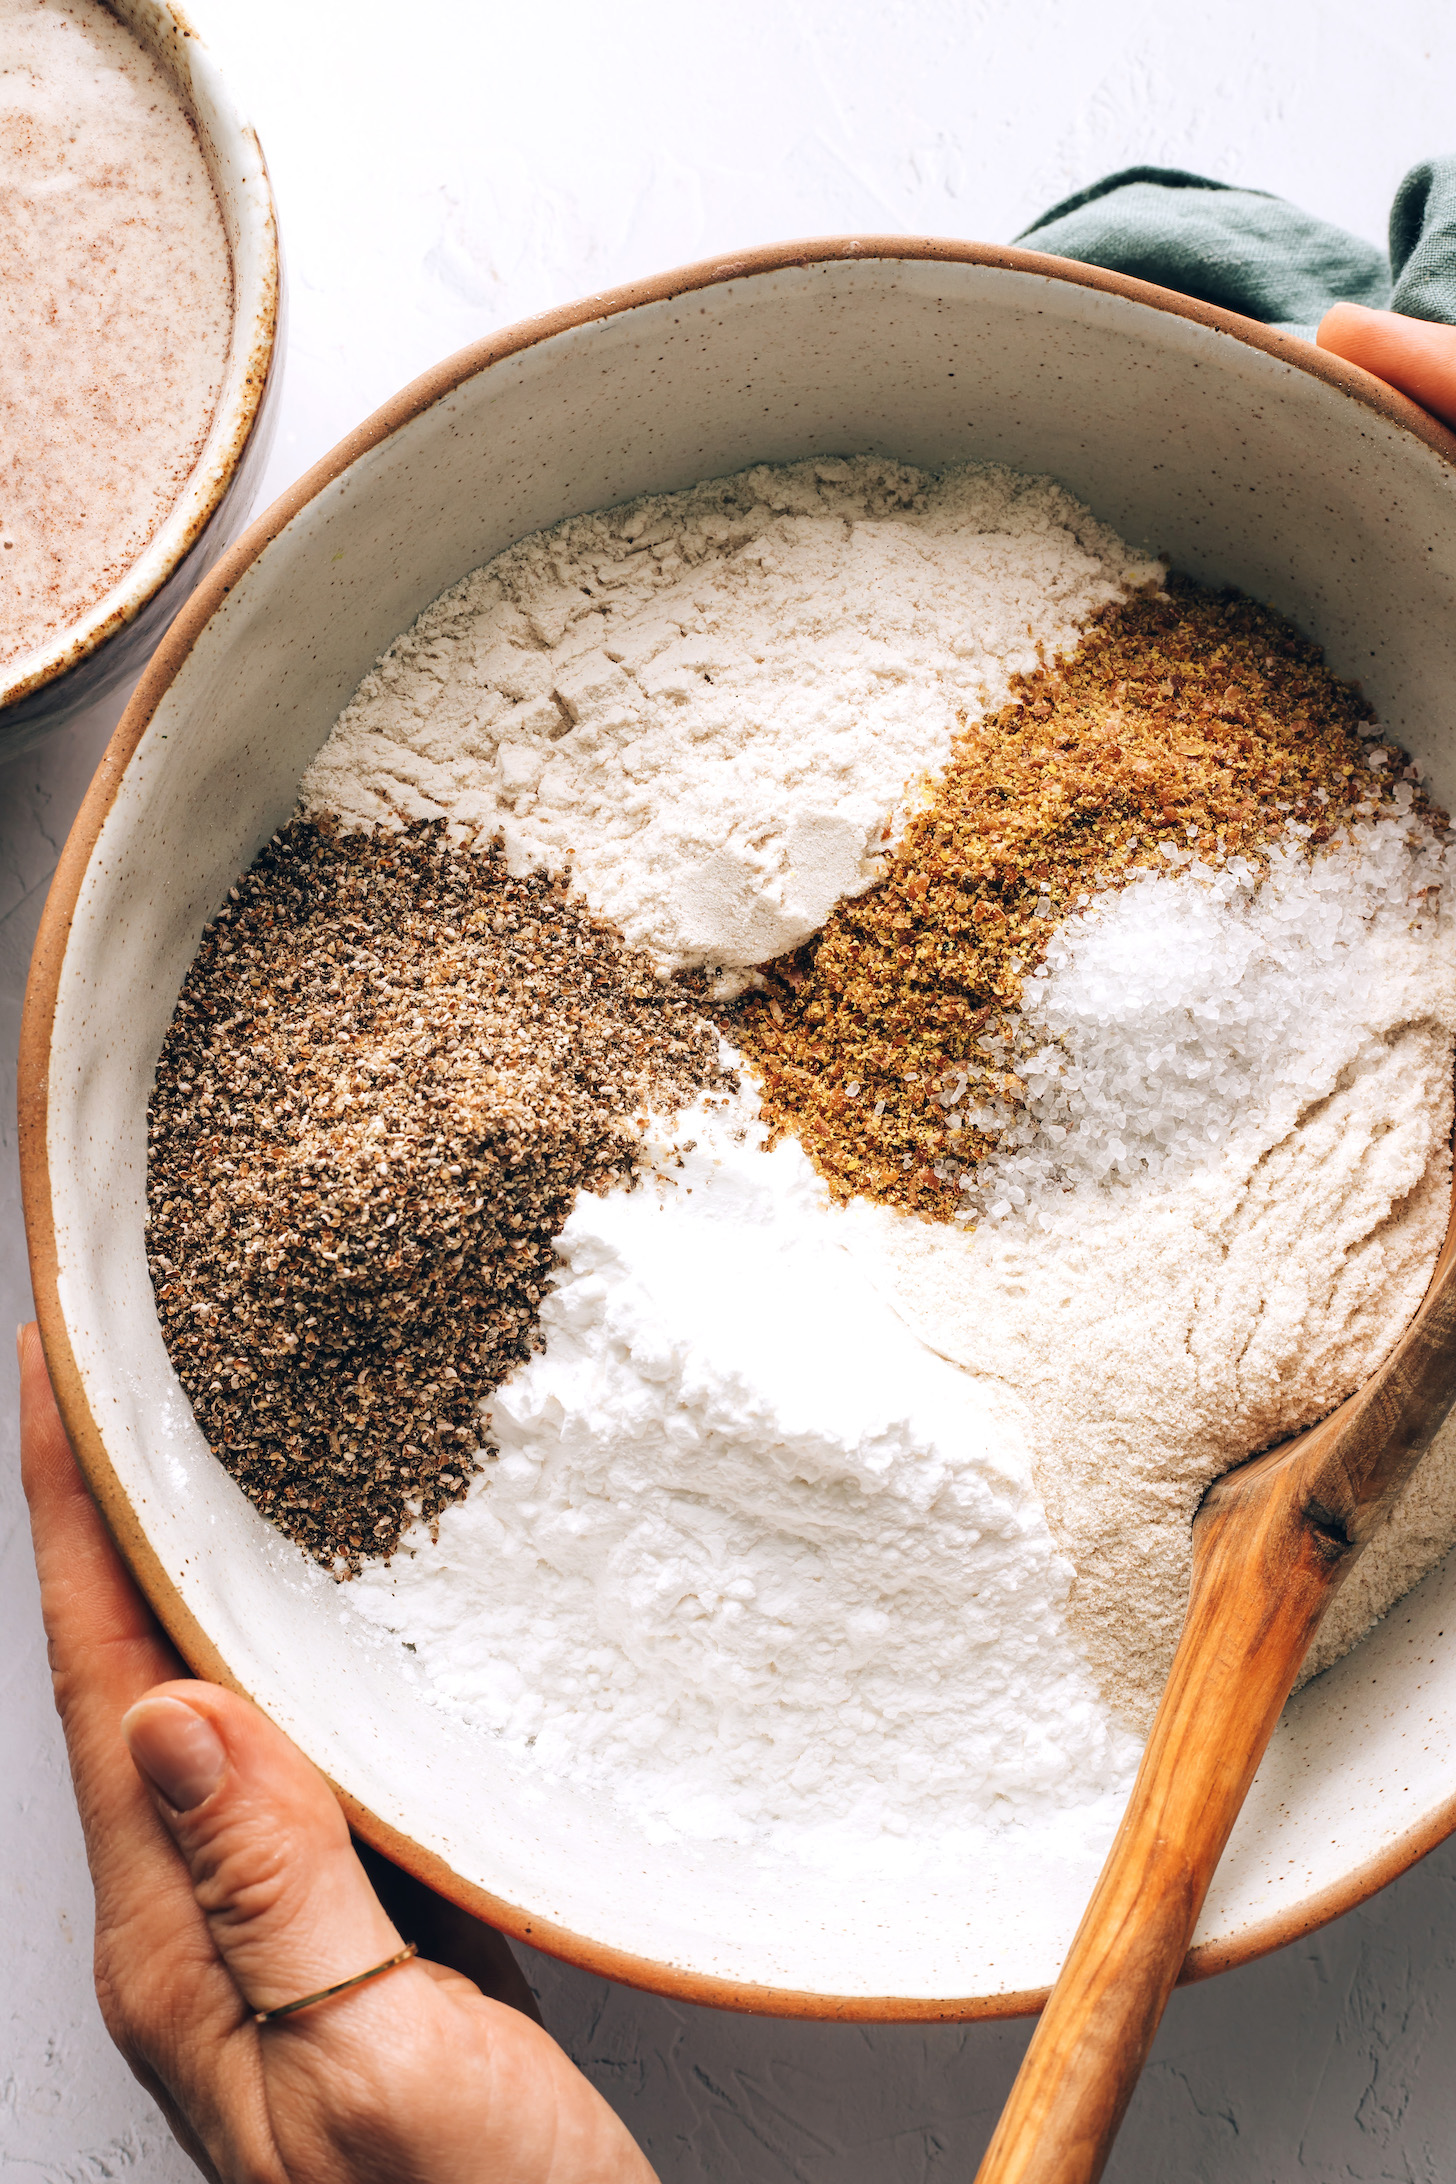 Wooden spoon in a bowl of sorghum flour, tapioca starch, brown rice flour, ground chia and flax, and sea salt